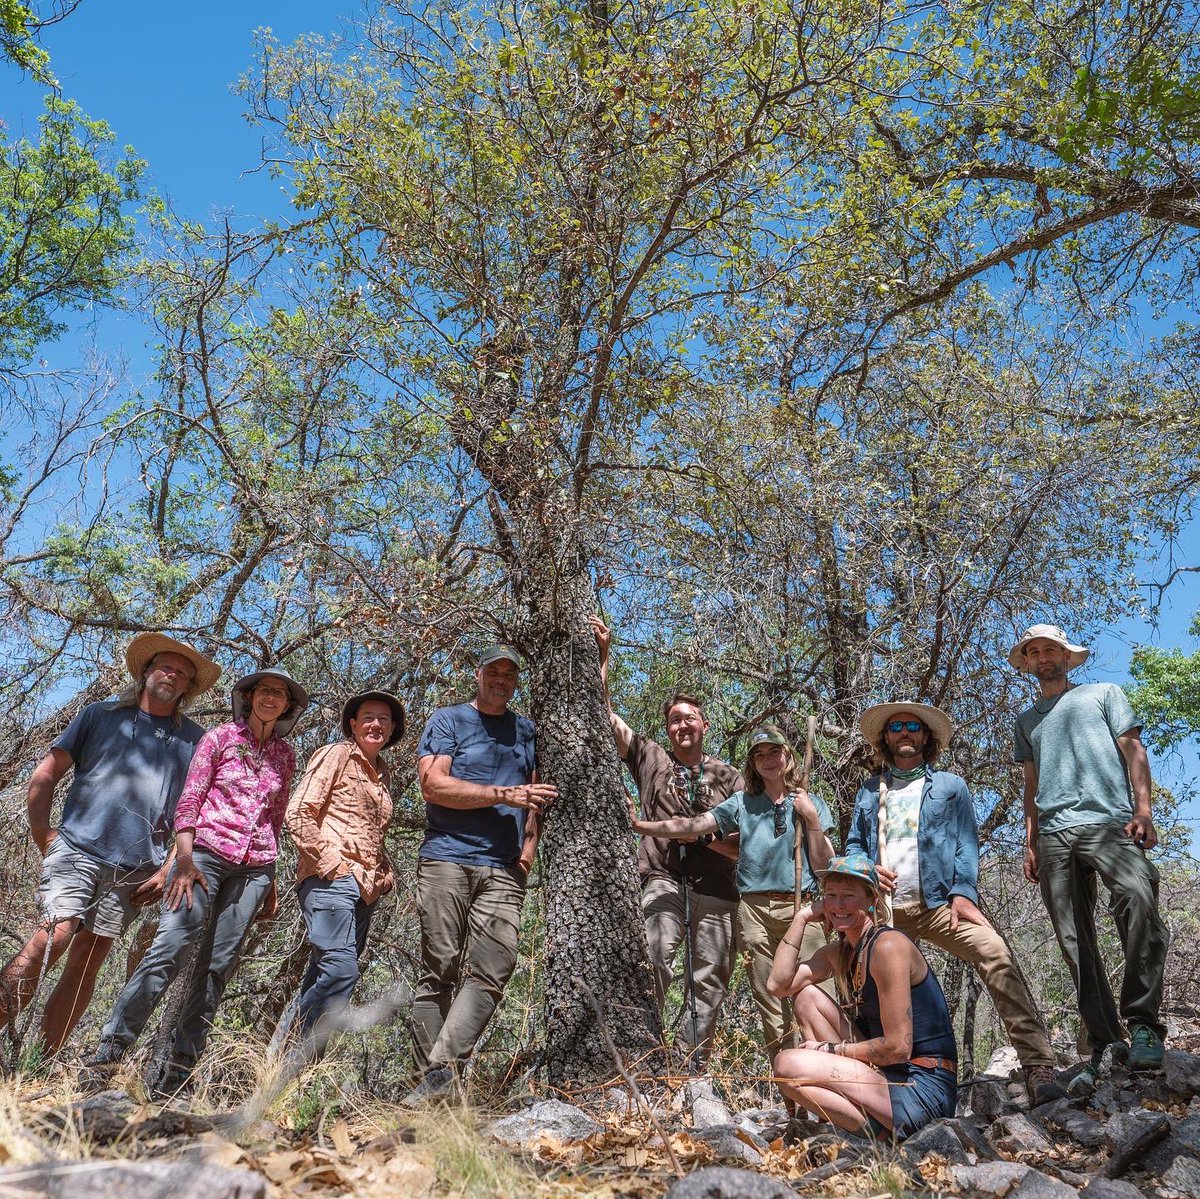 An #oak tree thought to be extinct, Quercus tardifolia, was discovered deep within @BigBendNPS, Texas by a group of researchers led by @MortonArboretum & @USBotanicGarden. Get an inside look at the journey to find & conserve the elusive oak: usbg.gov/researchers-re…